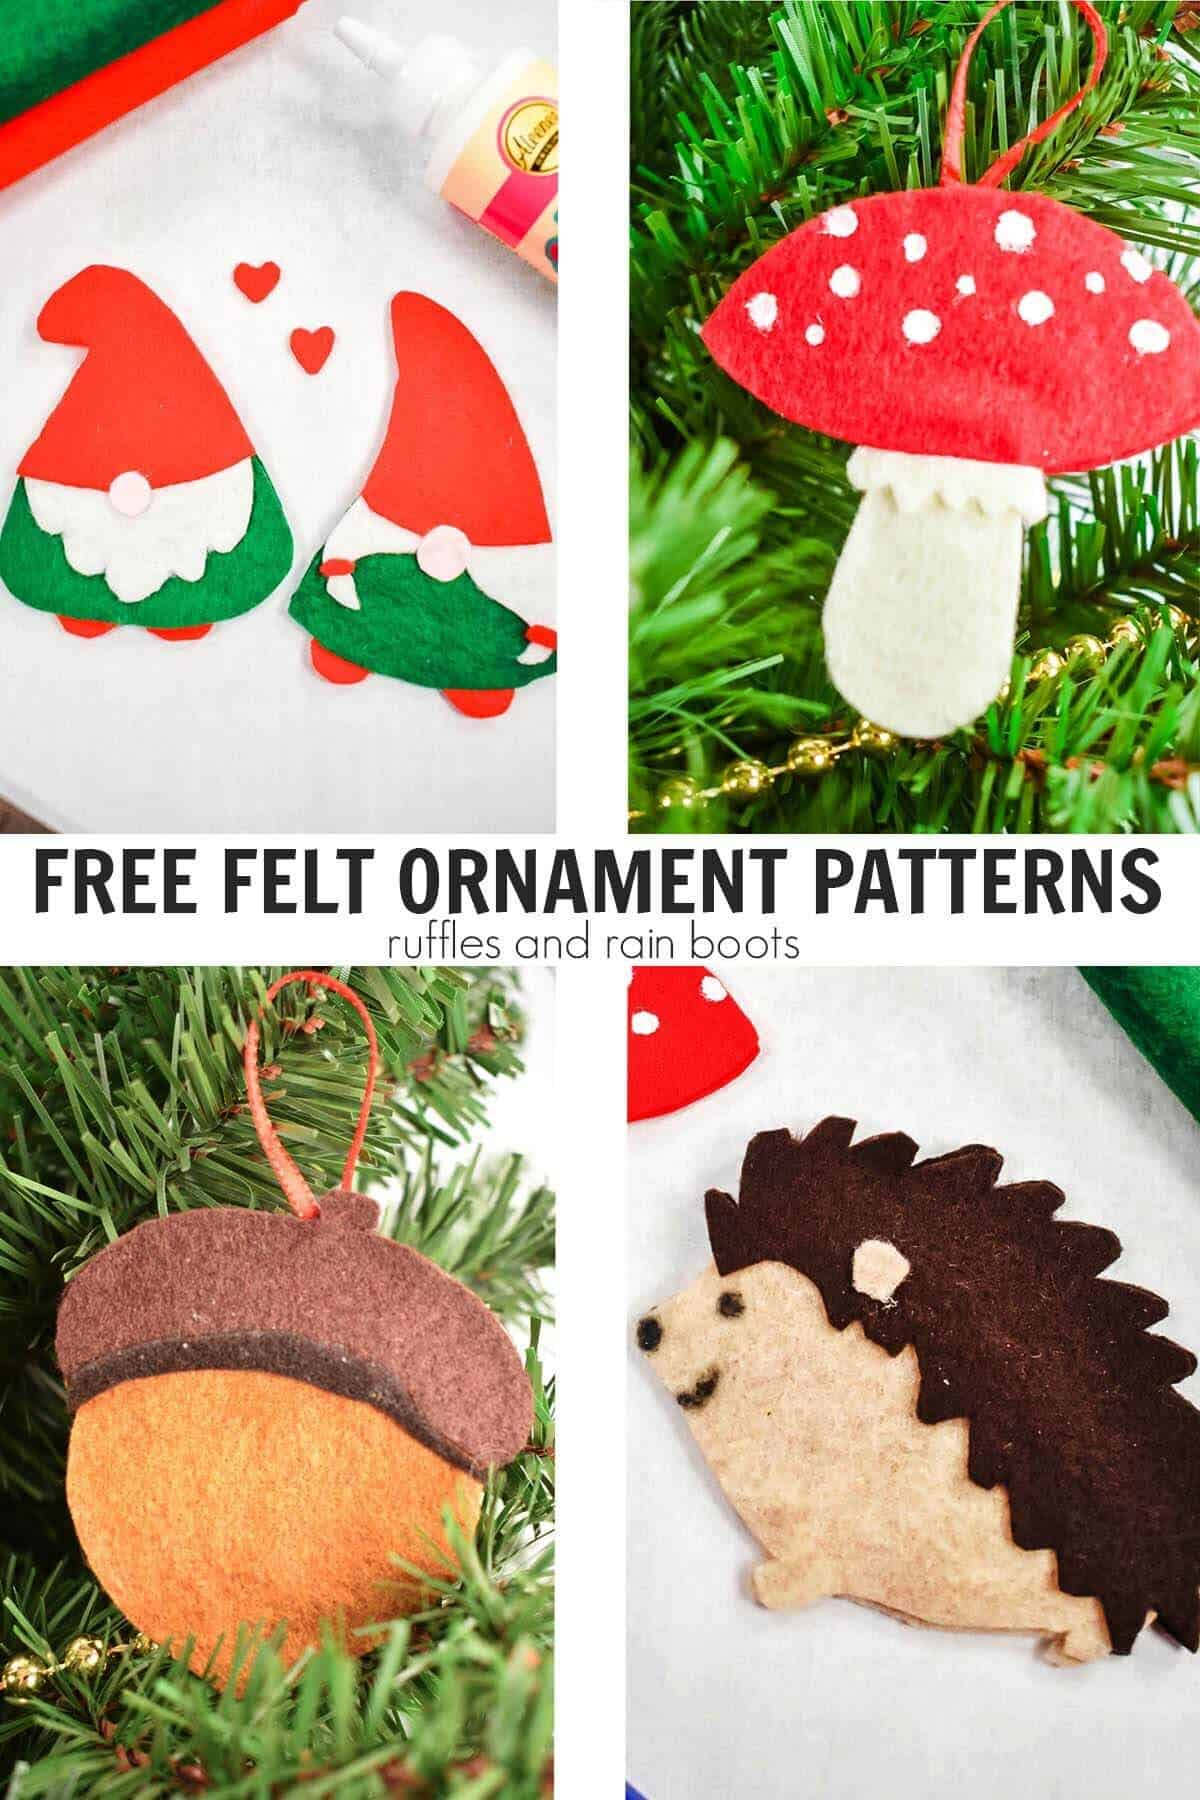 Vertical image collage showing felt ornament patterns for gnomes, mushrooms, acorns, and hedgehogs for fall crafts.